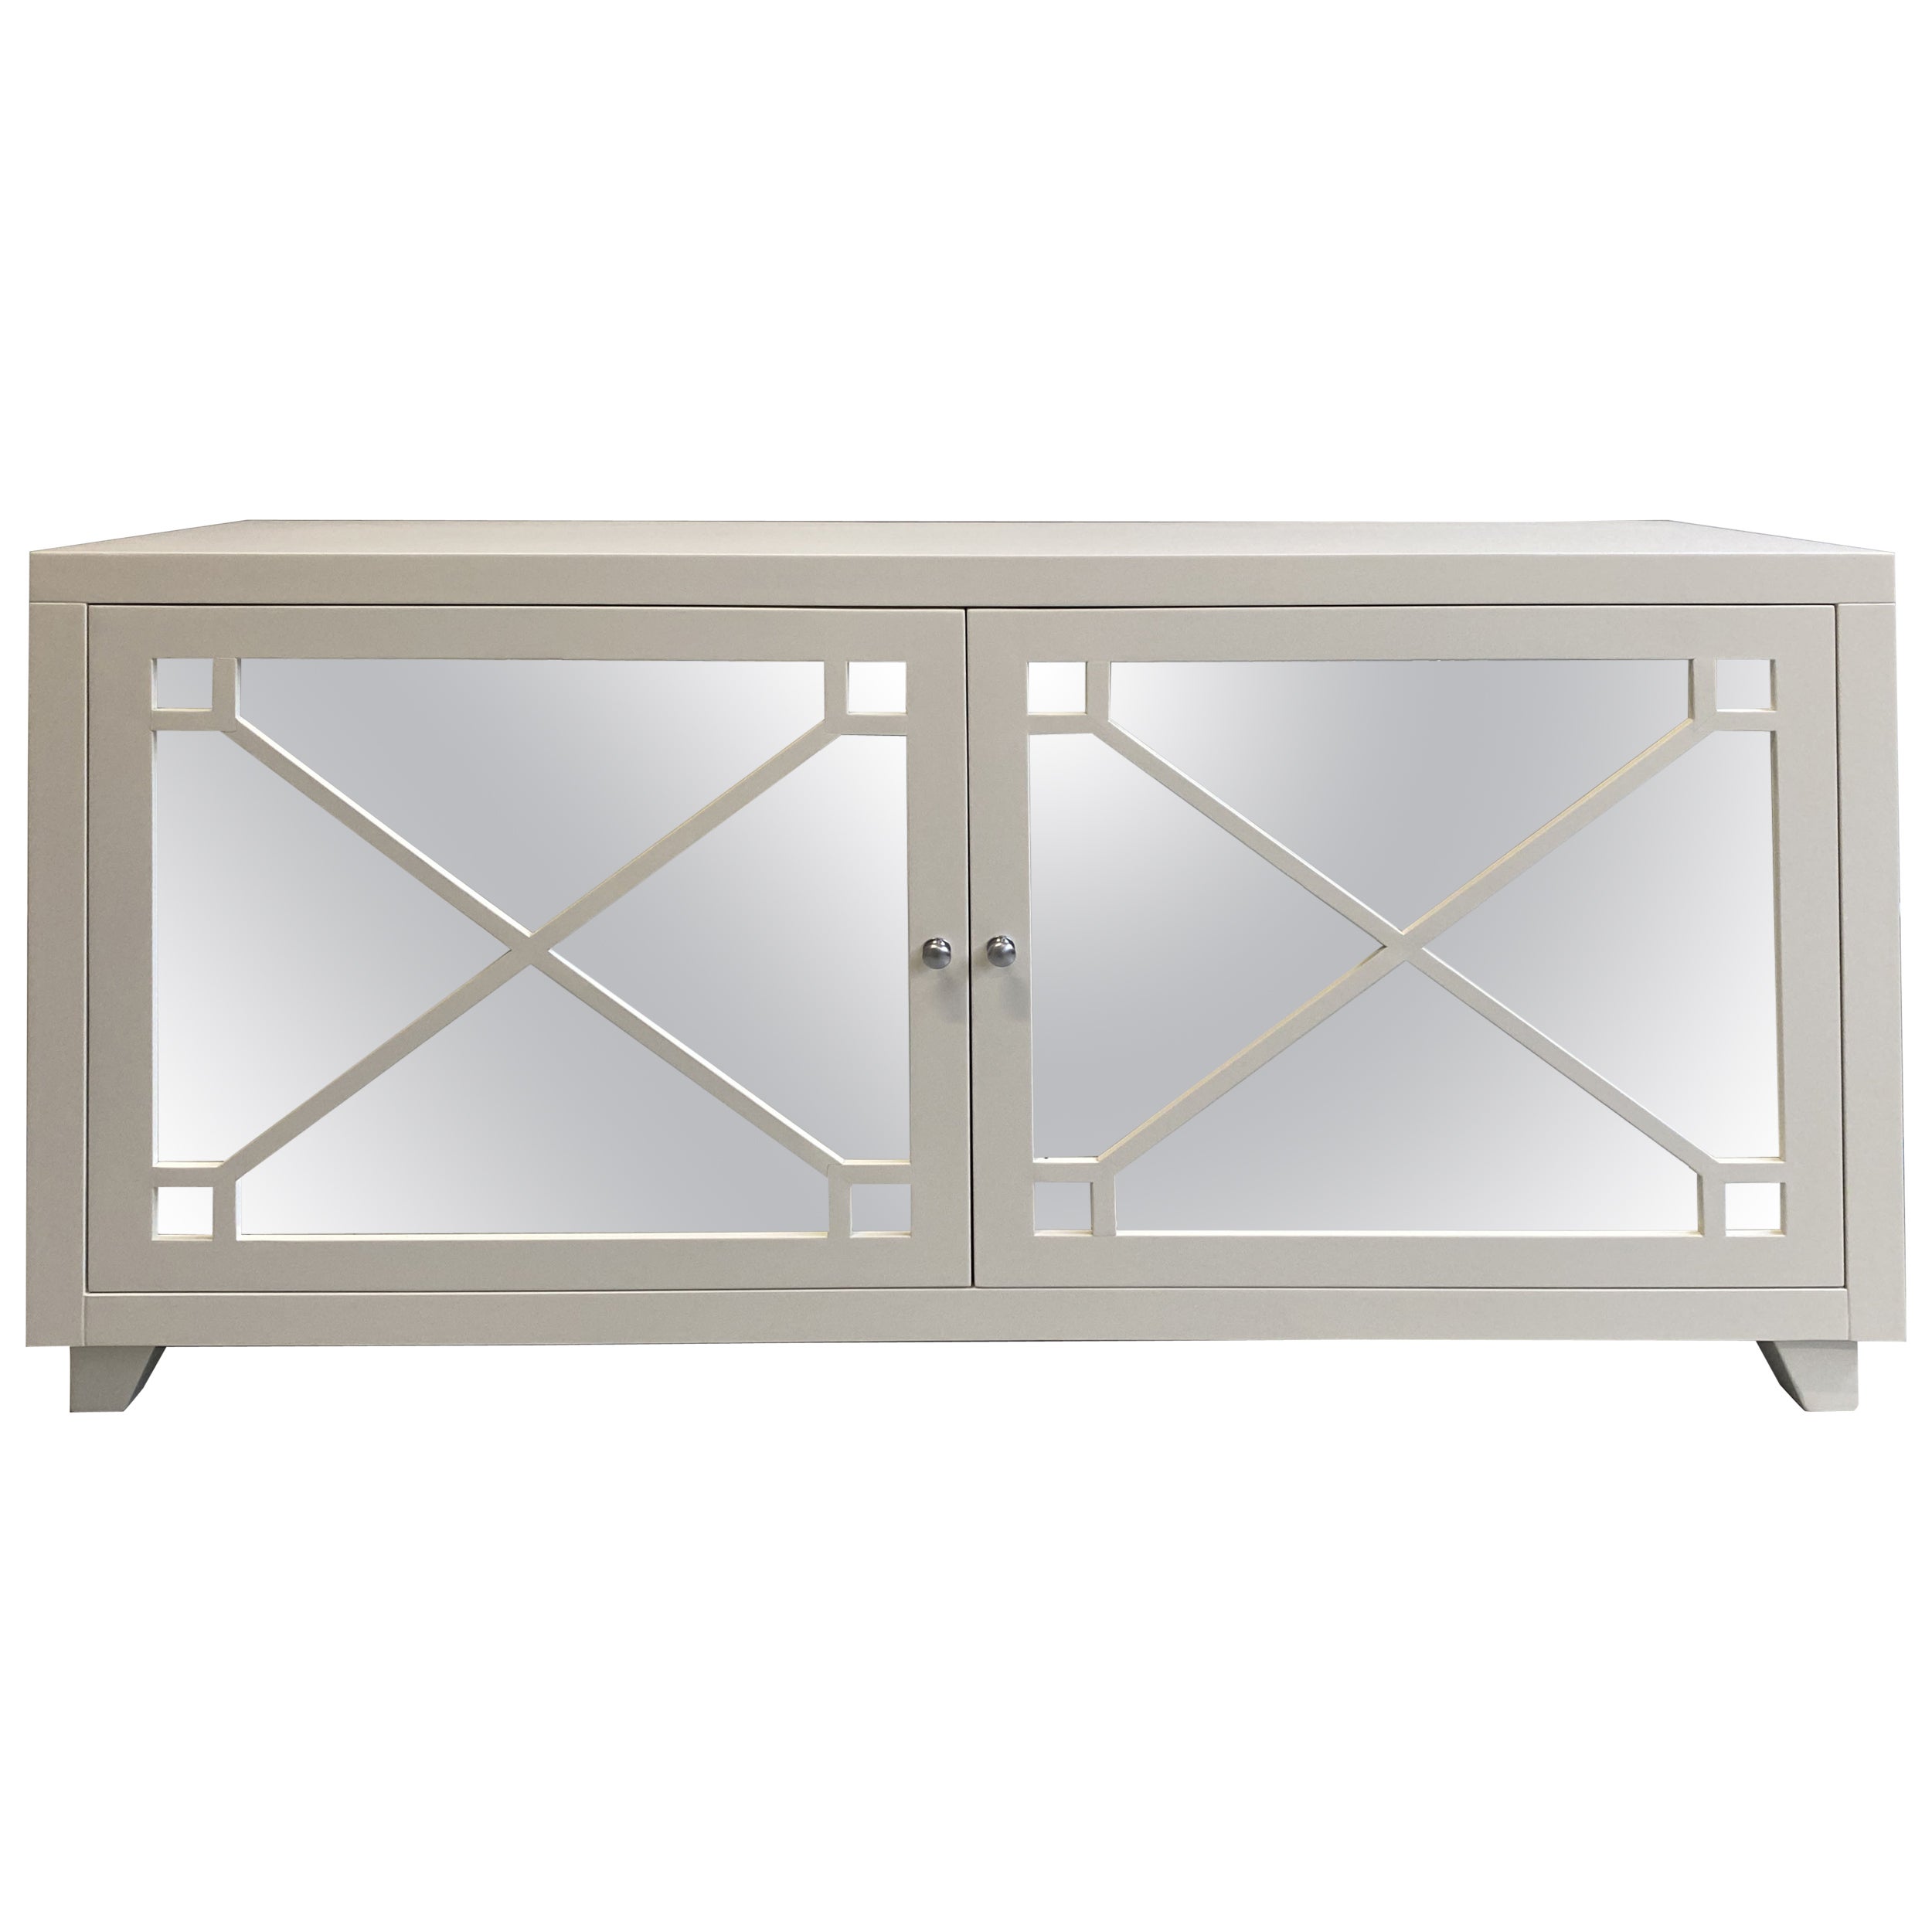 Italian Contemporary Lacquered White Wood and Mirror Sideboard